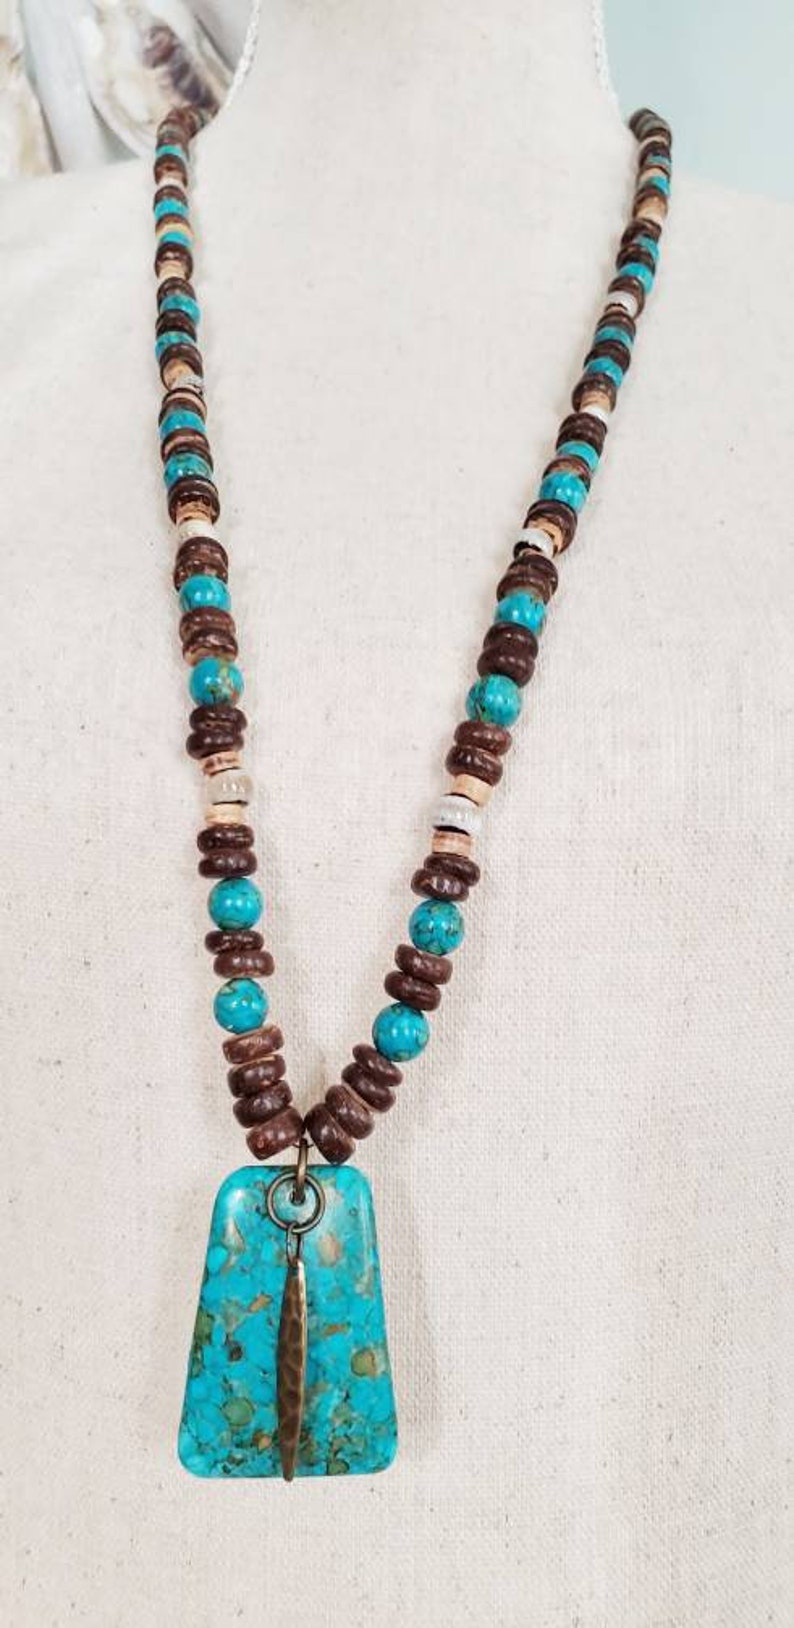 Kingman Turquoise necklace, statement necklace for women, boho beaded necklace, best friend gift, gifts under 40 image 3